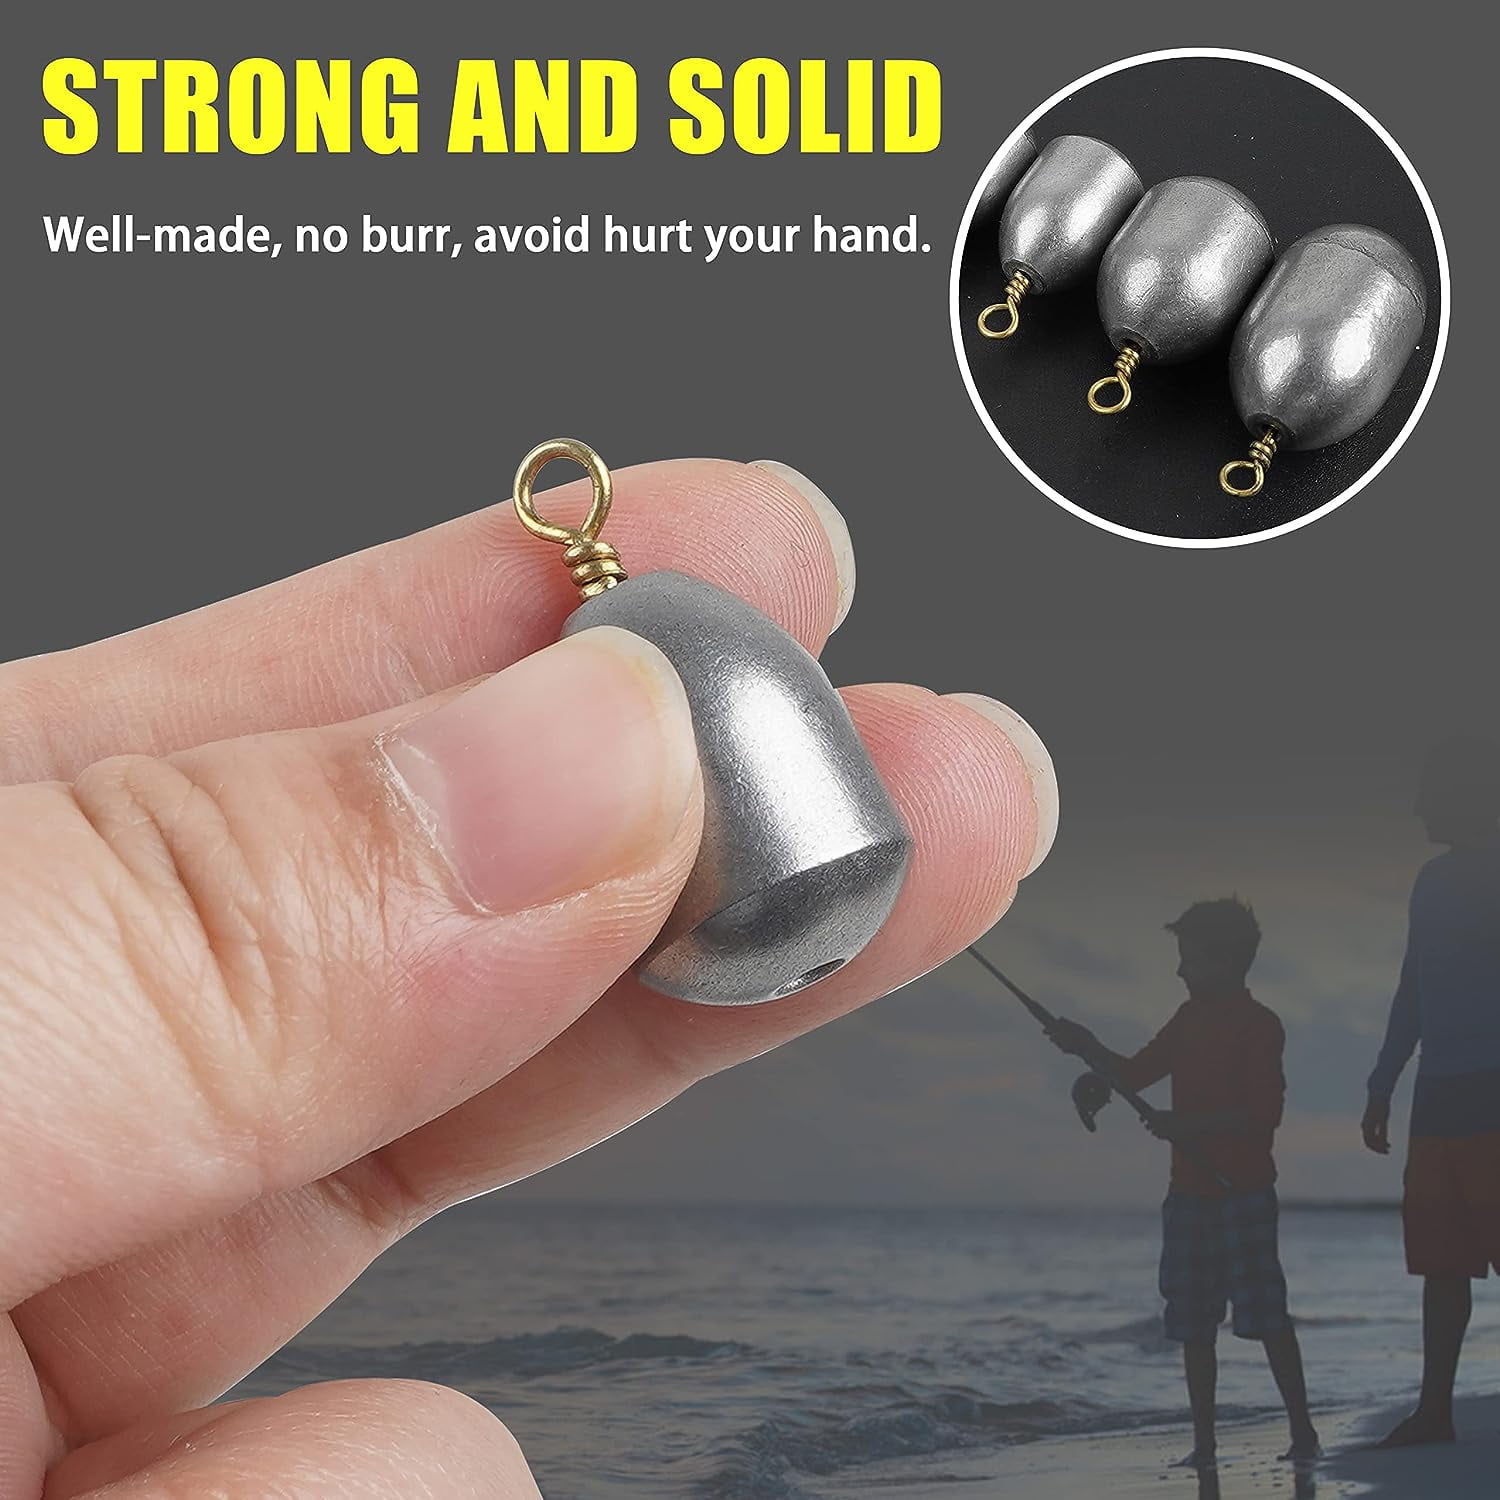 Iron Fishing Weights Assortment, 20pcs Fish Bass Sinkers Casting Weight Kit  with Tackle Box 5 Weights 